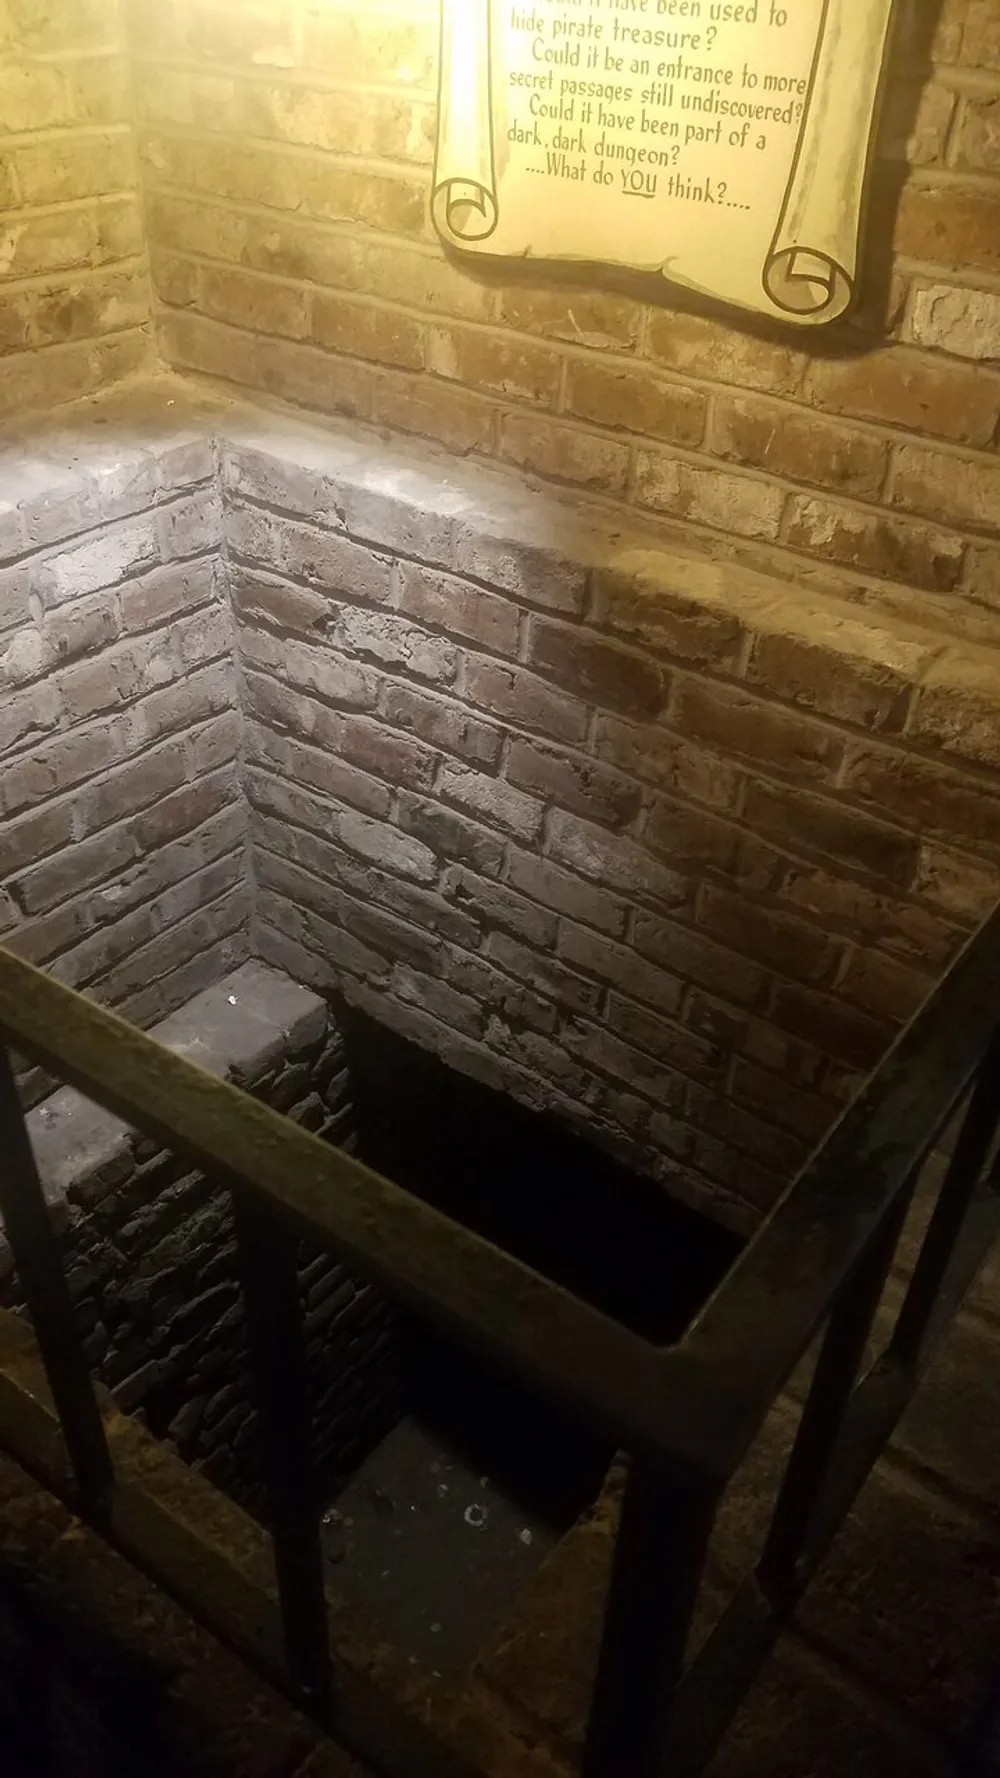 The image shows a dimly lit brick-lined staircase leading down to a dark opening with a plaque on the wall suggesting a historical or mysterious narrative about pirate treasure or secret passages